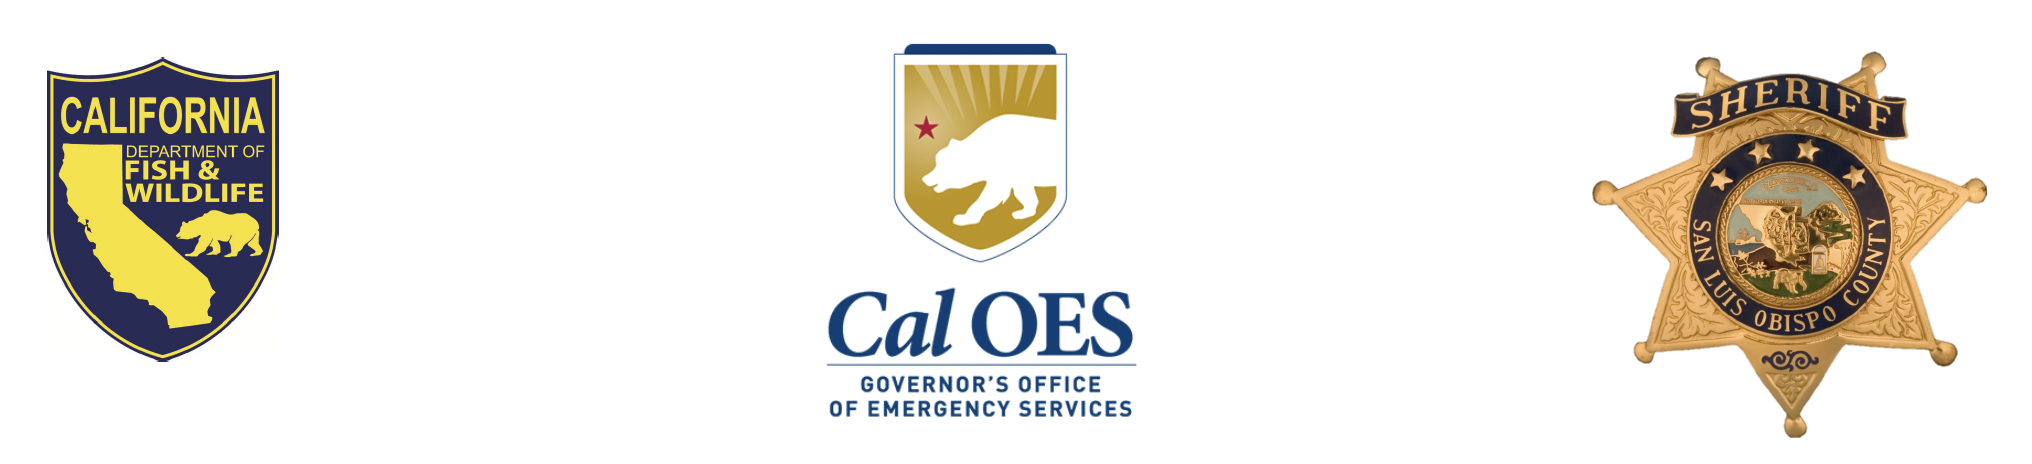 Logos for the California Department of Fish and Wildlife, California Governor's Office of Emergency Services, and San Luis Obispo County Sheriff's Office.